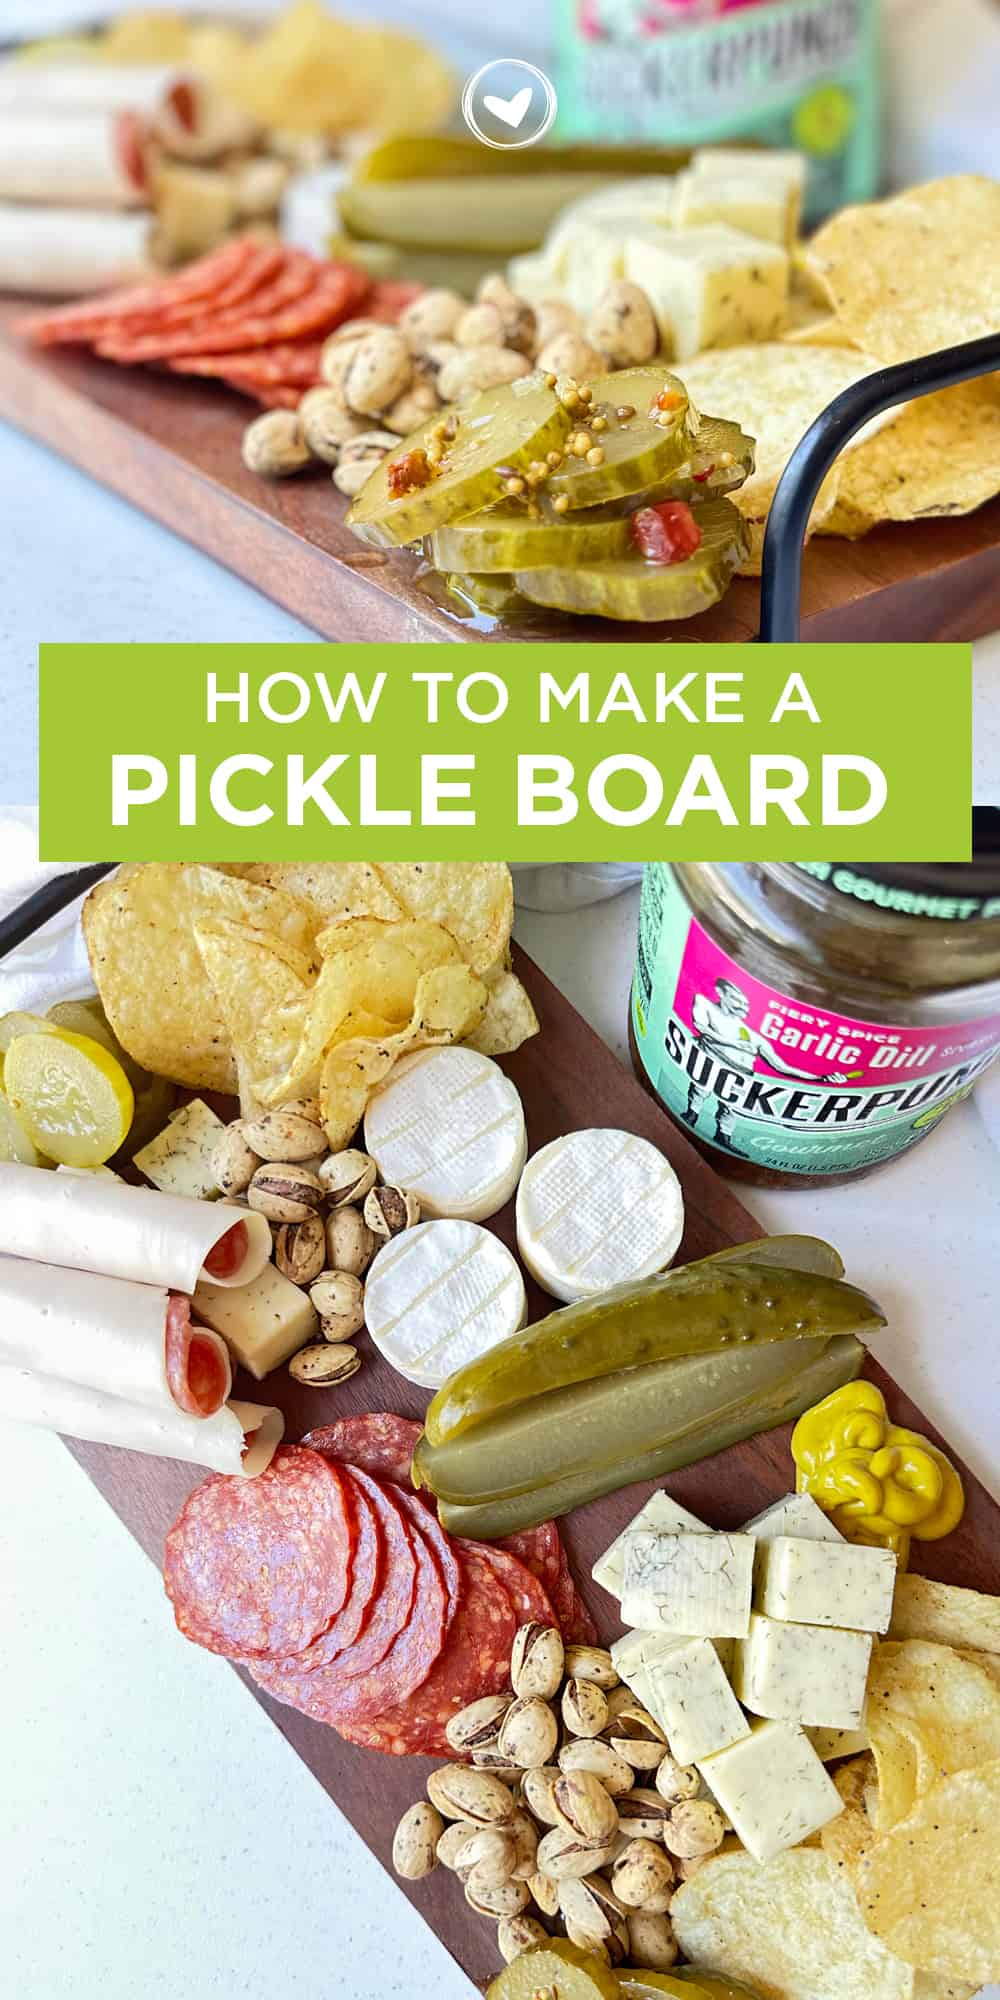 How to Make a Pickle Board